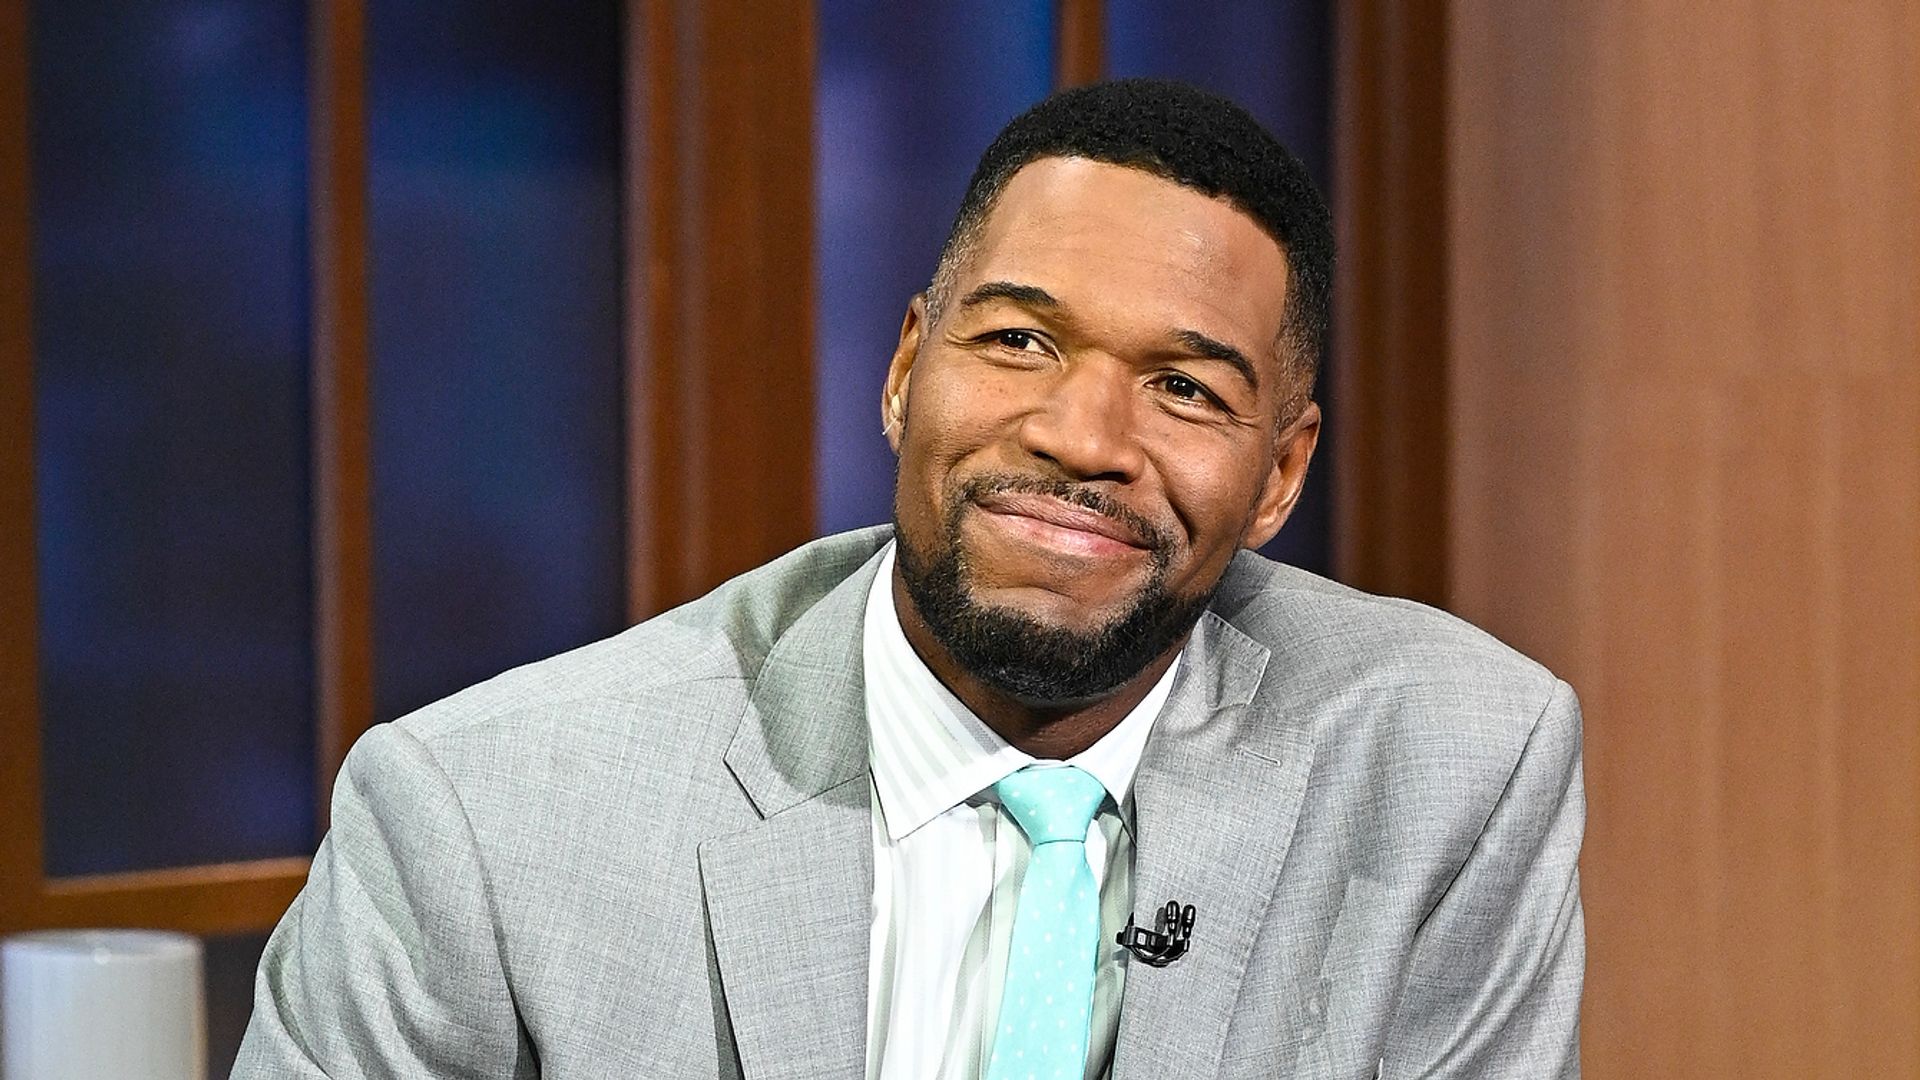 GOOD MORNING AMERICA - 8/18/23 - 
Show coverage of "Good Morning America" on Friday, August 18, 2023 on ABC. 
MICHAEL STRAHAN